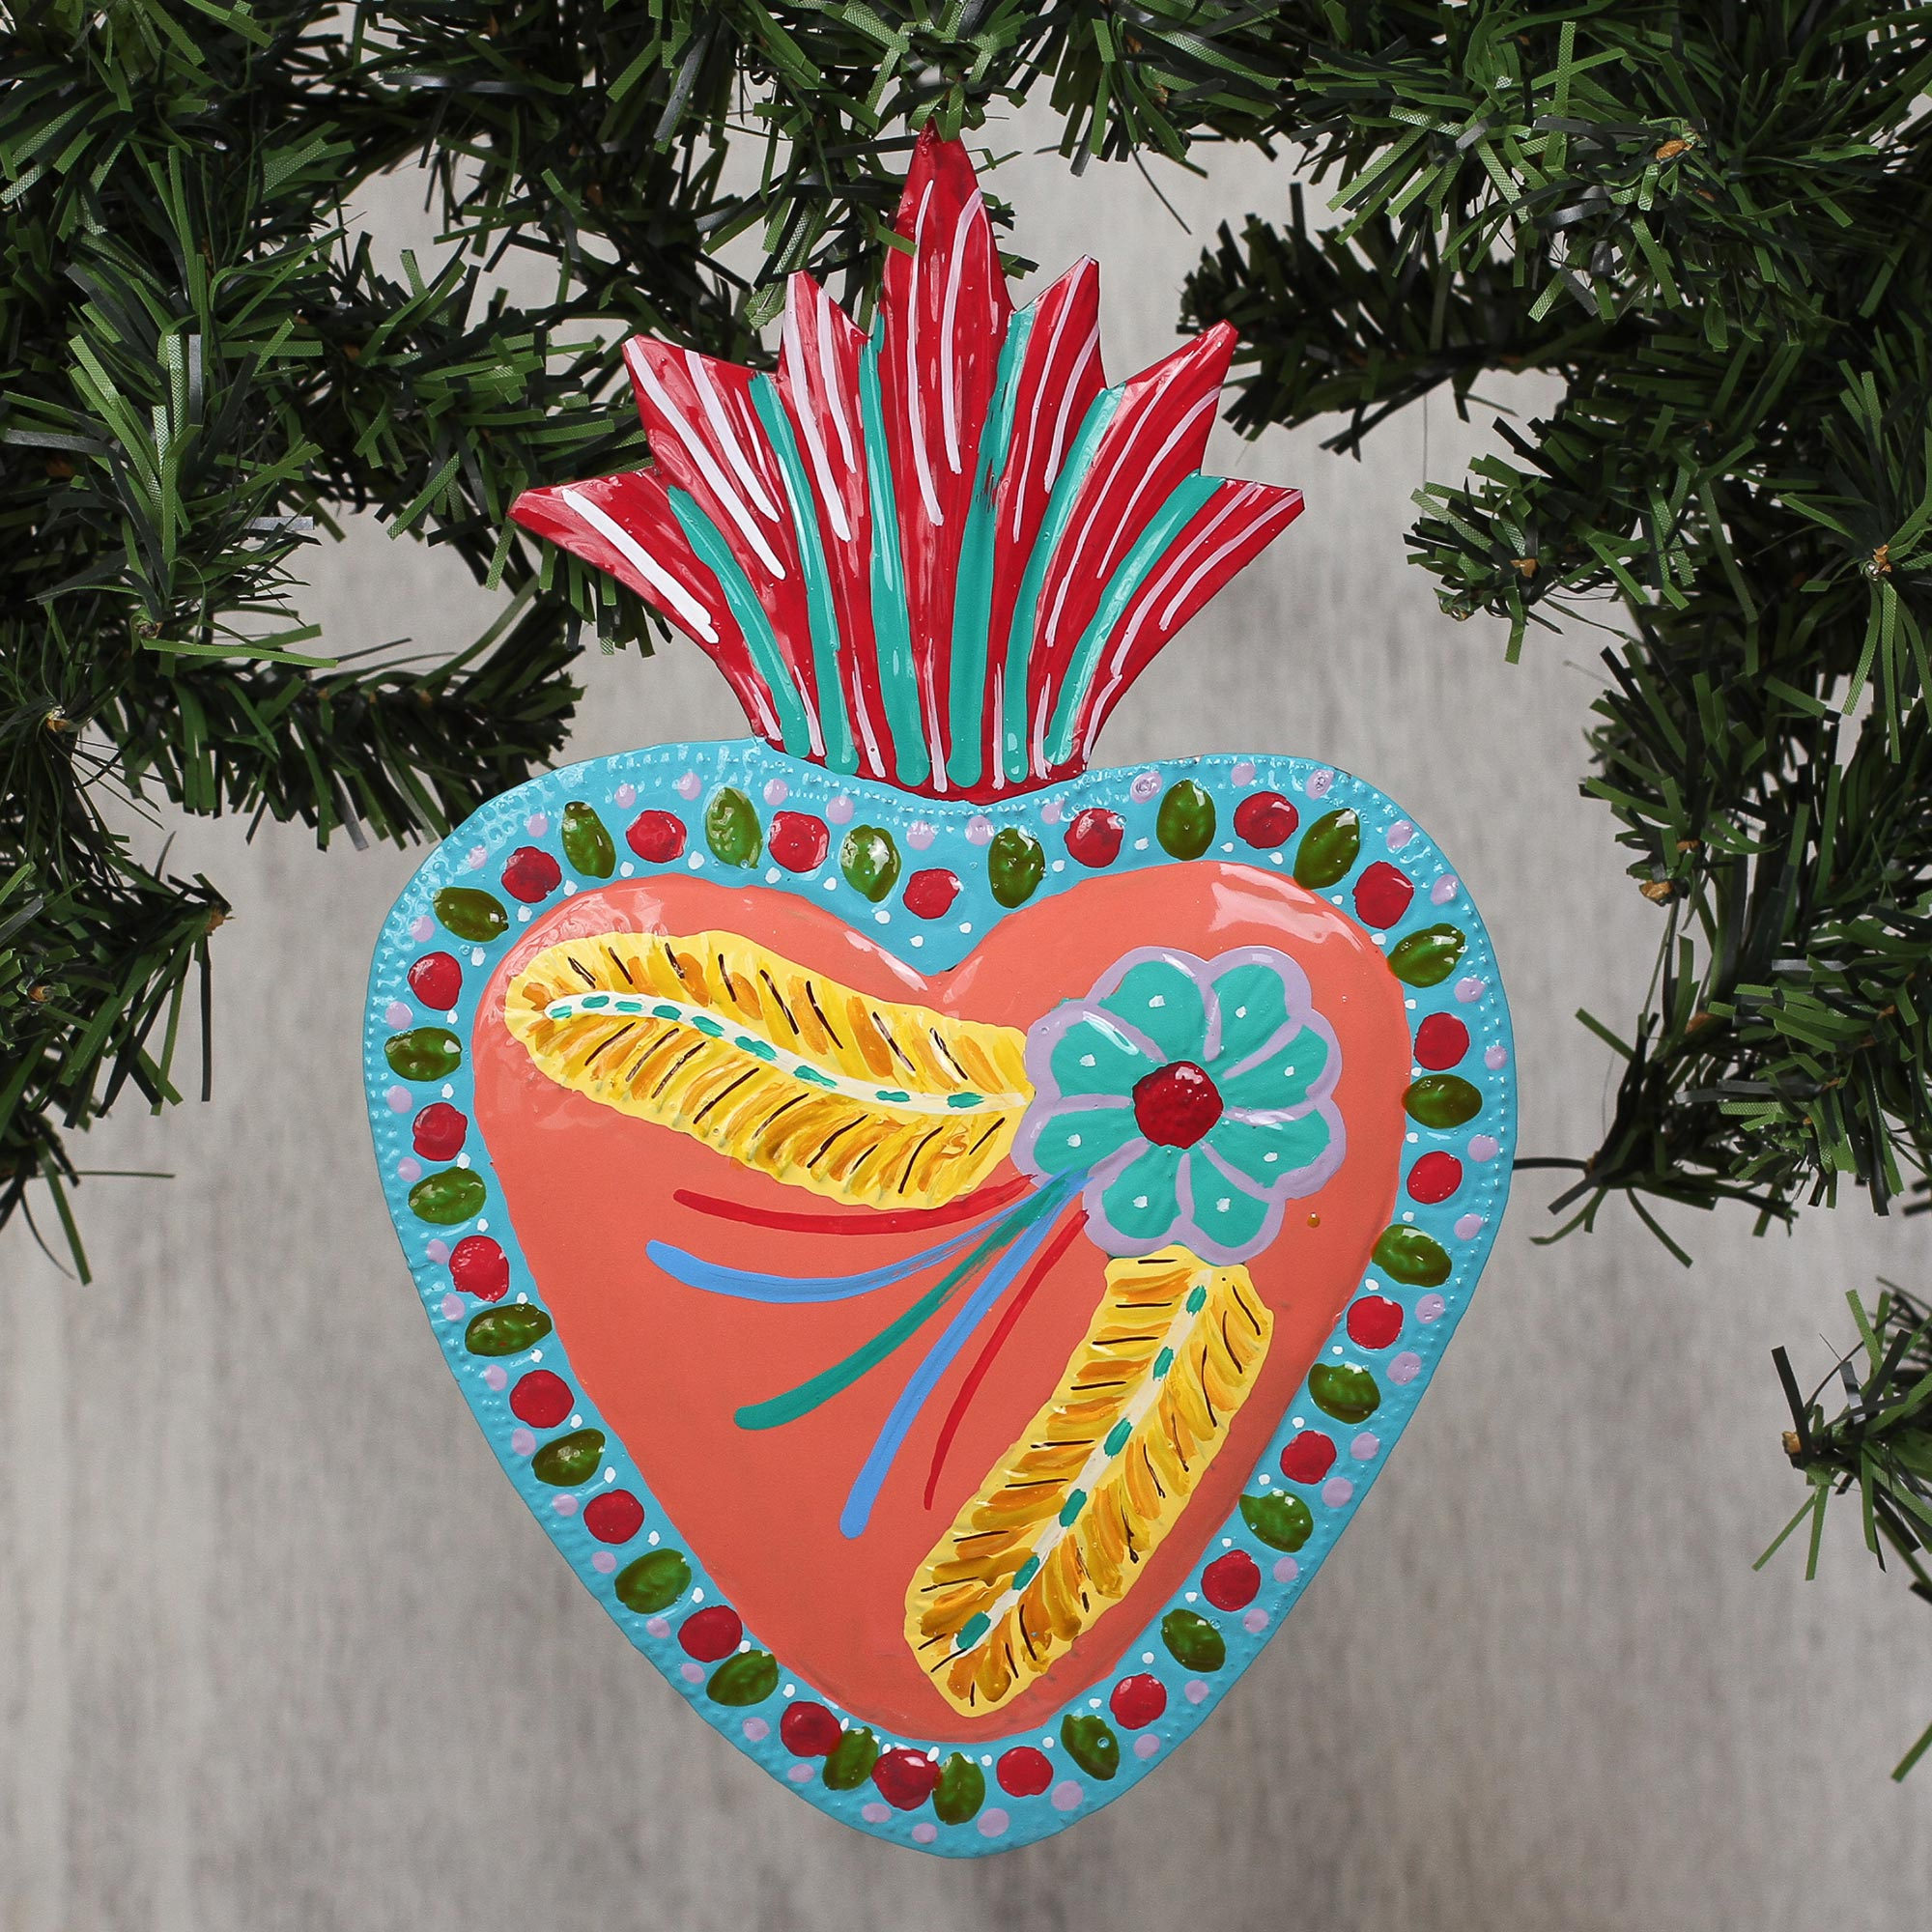 Heart Shaped Floral Tin Wall Art In Honeysuckle From Mexico Honeysuckle Dream Novica